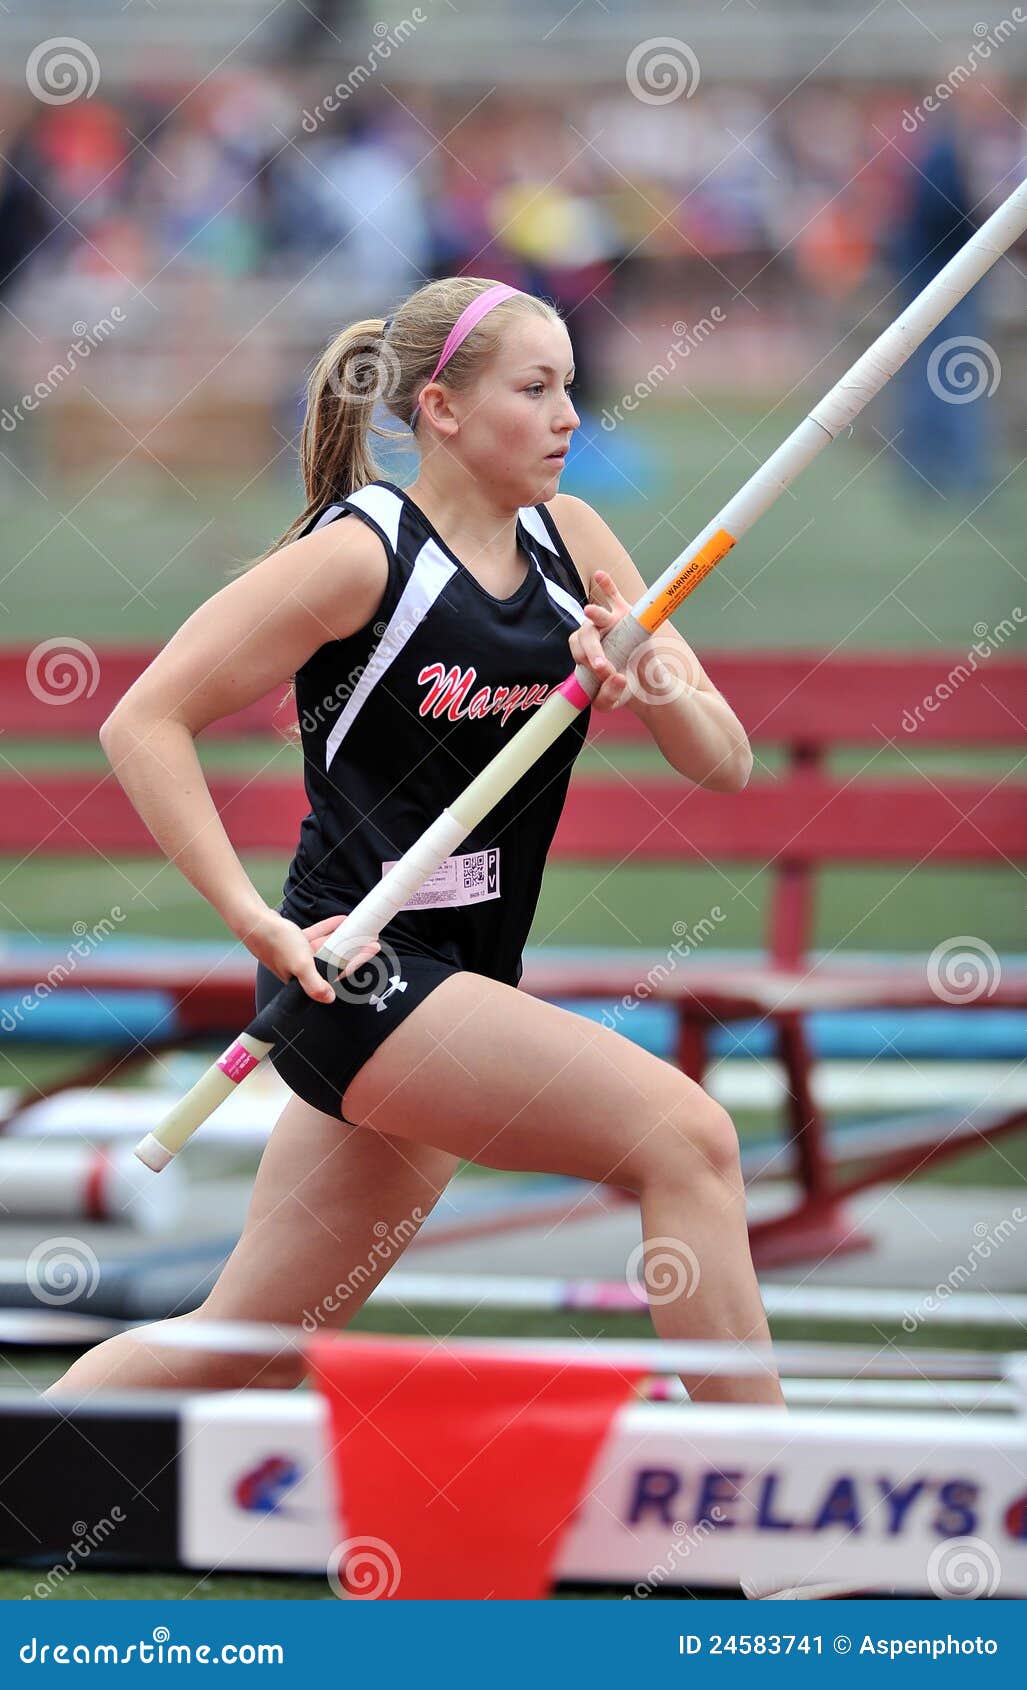 Track And Field Pole Vault Telegraph